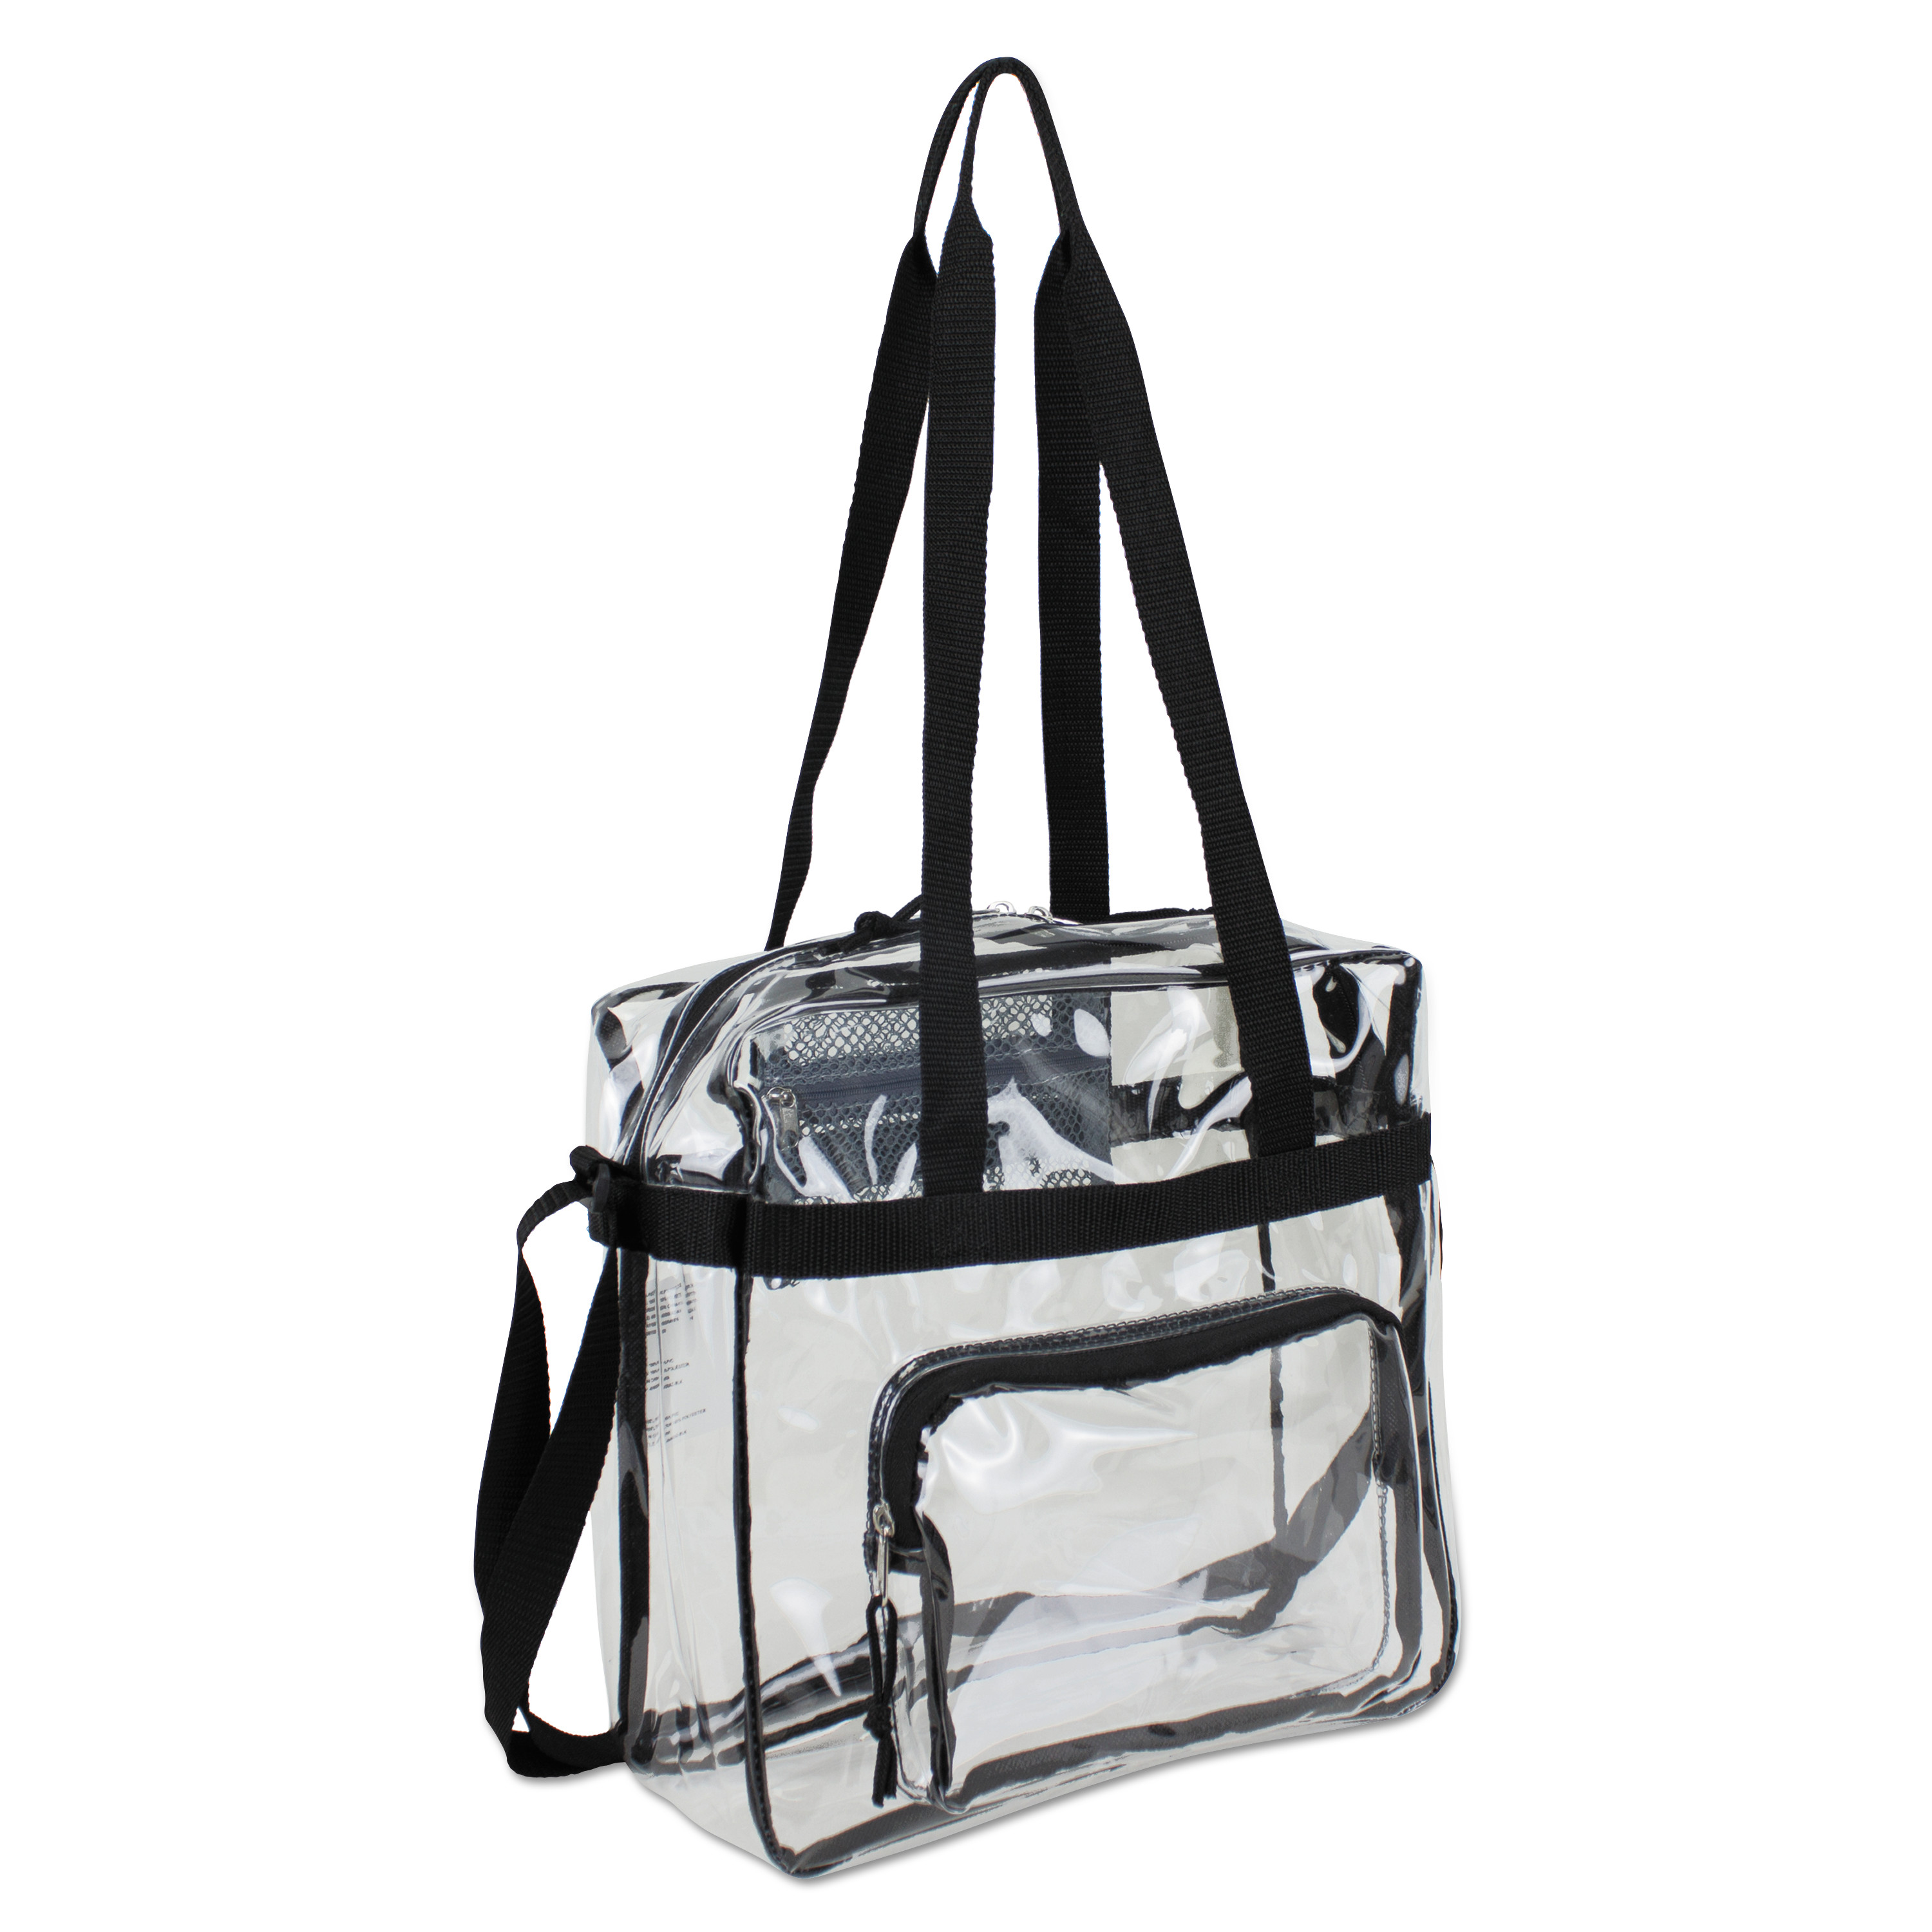 Clear Stadium Approved Tote, 12 x 5 x 12, Black/Clear